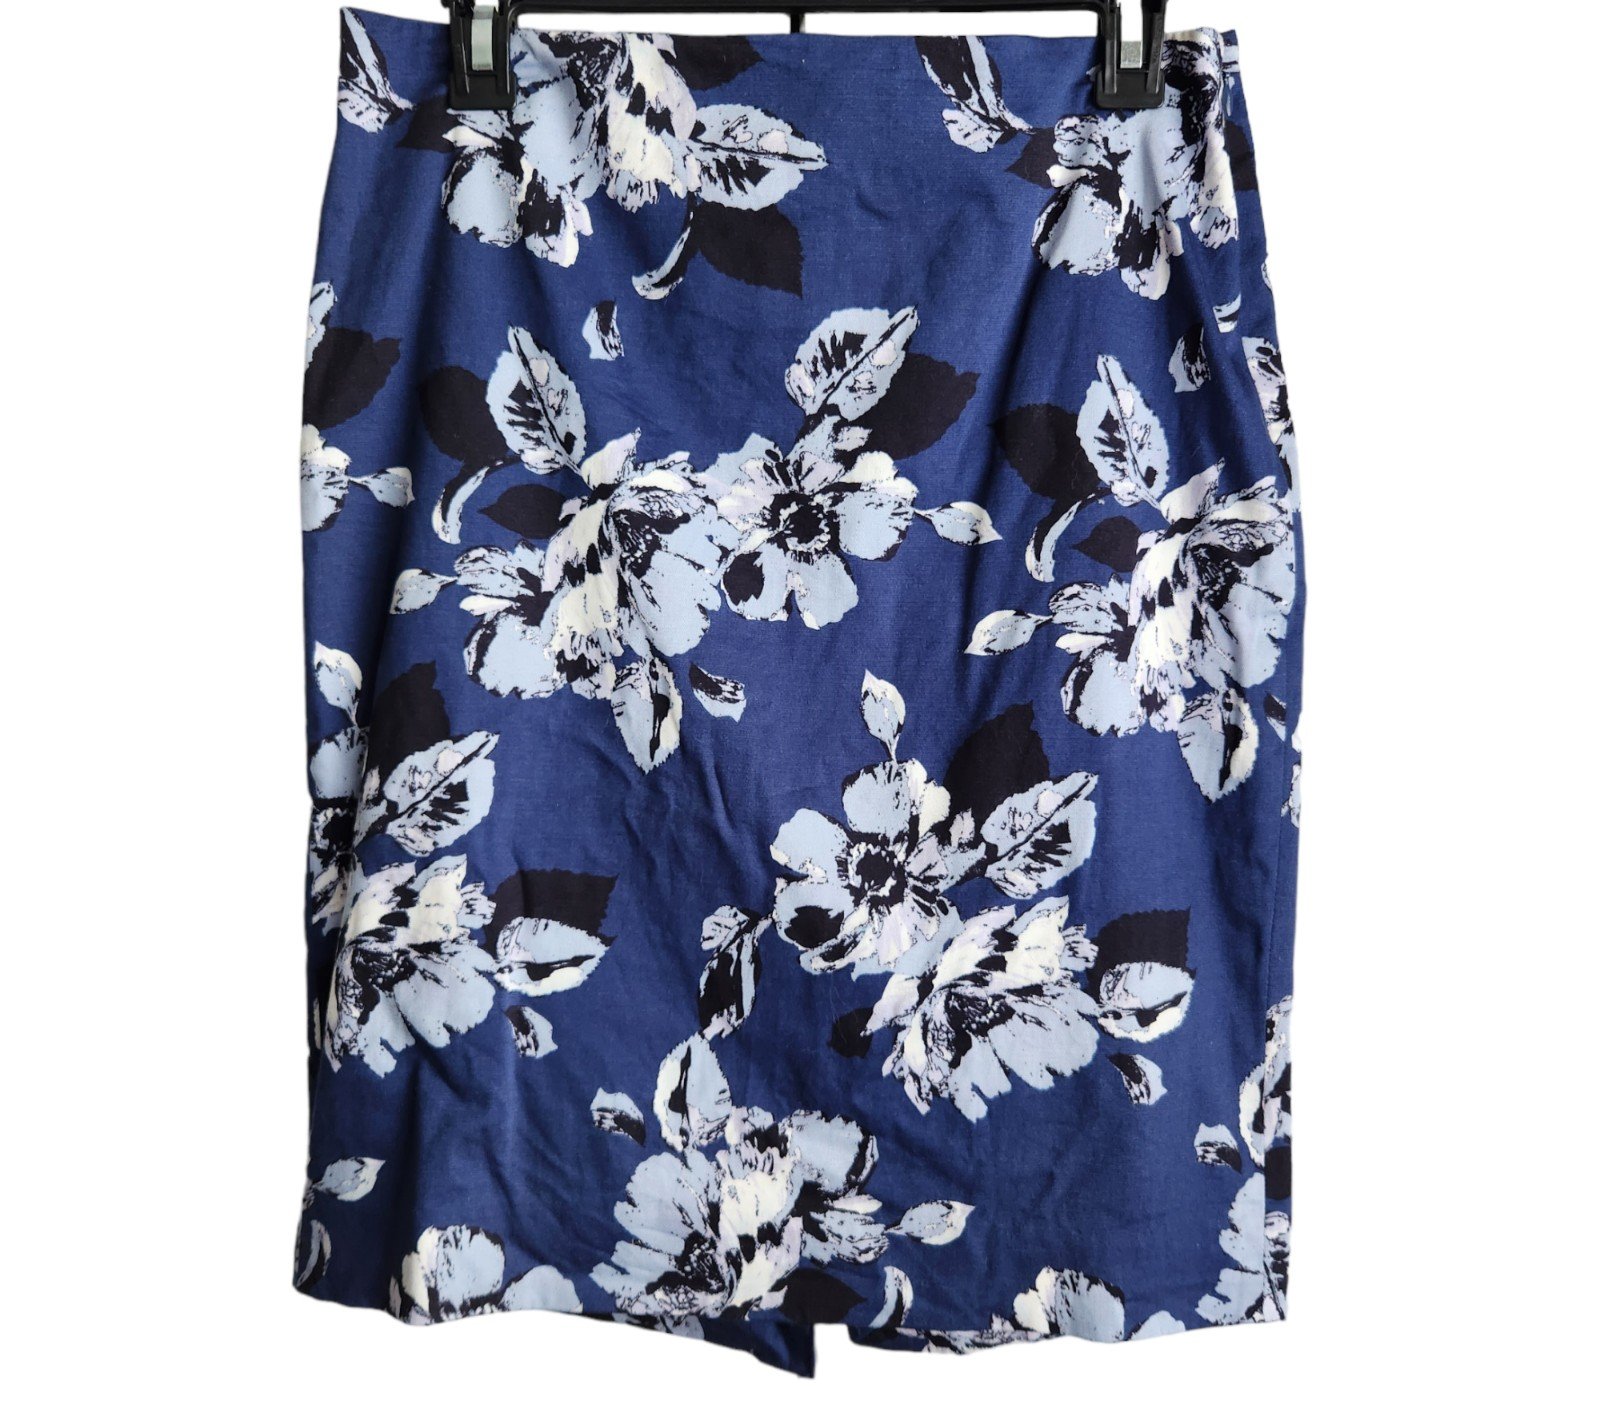 Authentic The Limited Skirt, Size 6, Blue / Floral, Straight nzDcYrfKk Wholesale